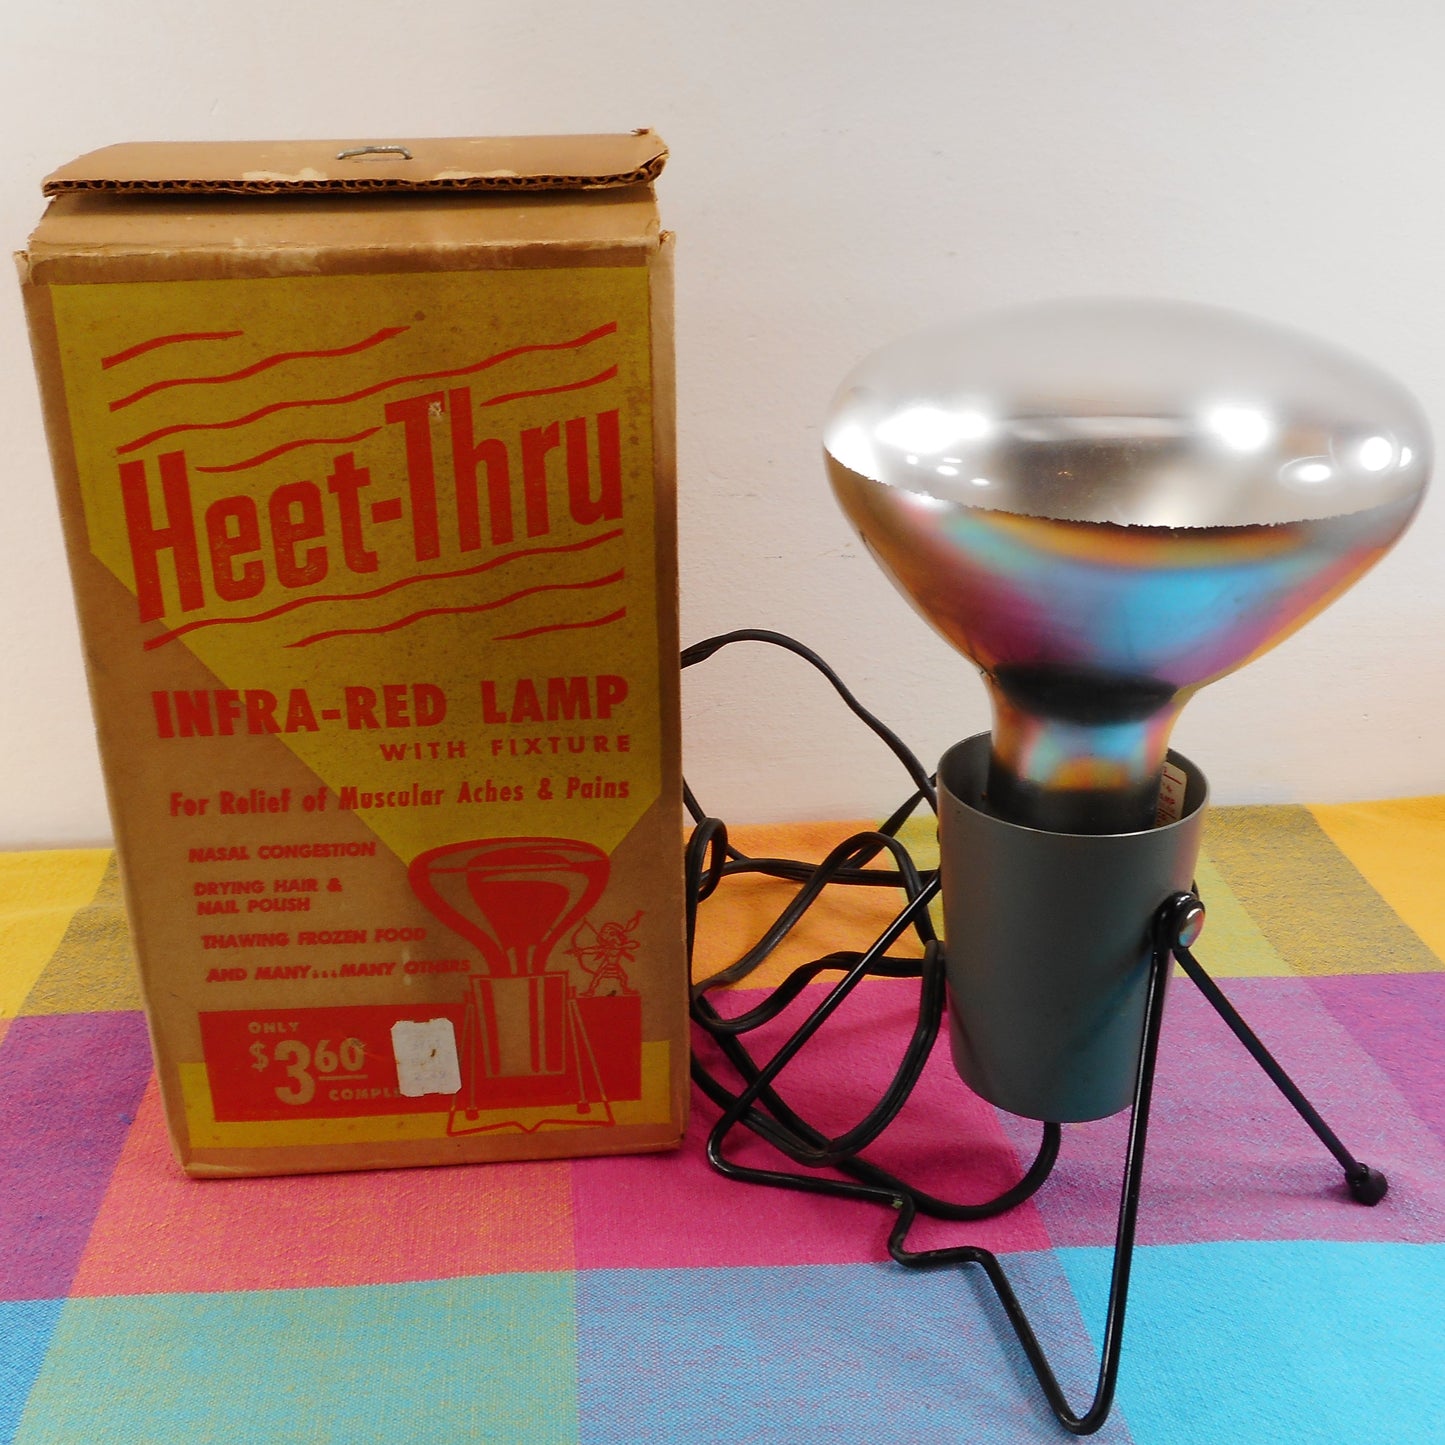 Heet-Thru Vintage Infra-Red Lamp Model LH-1 with Box - First Lamp Co. Toledo Ohio